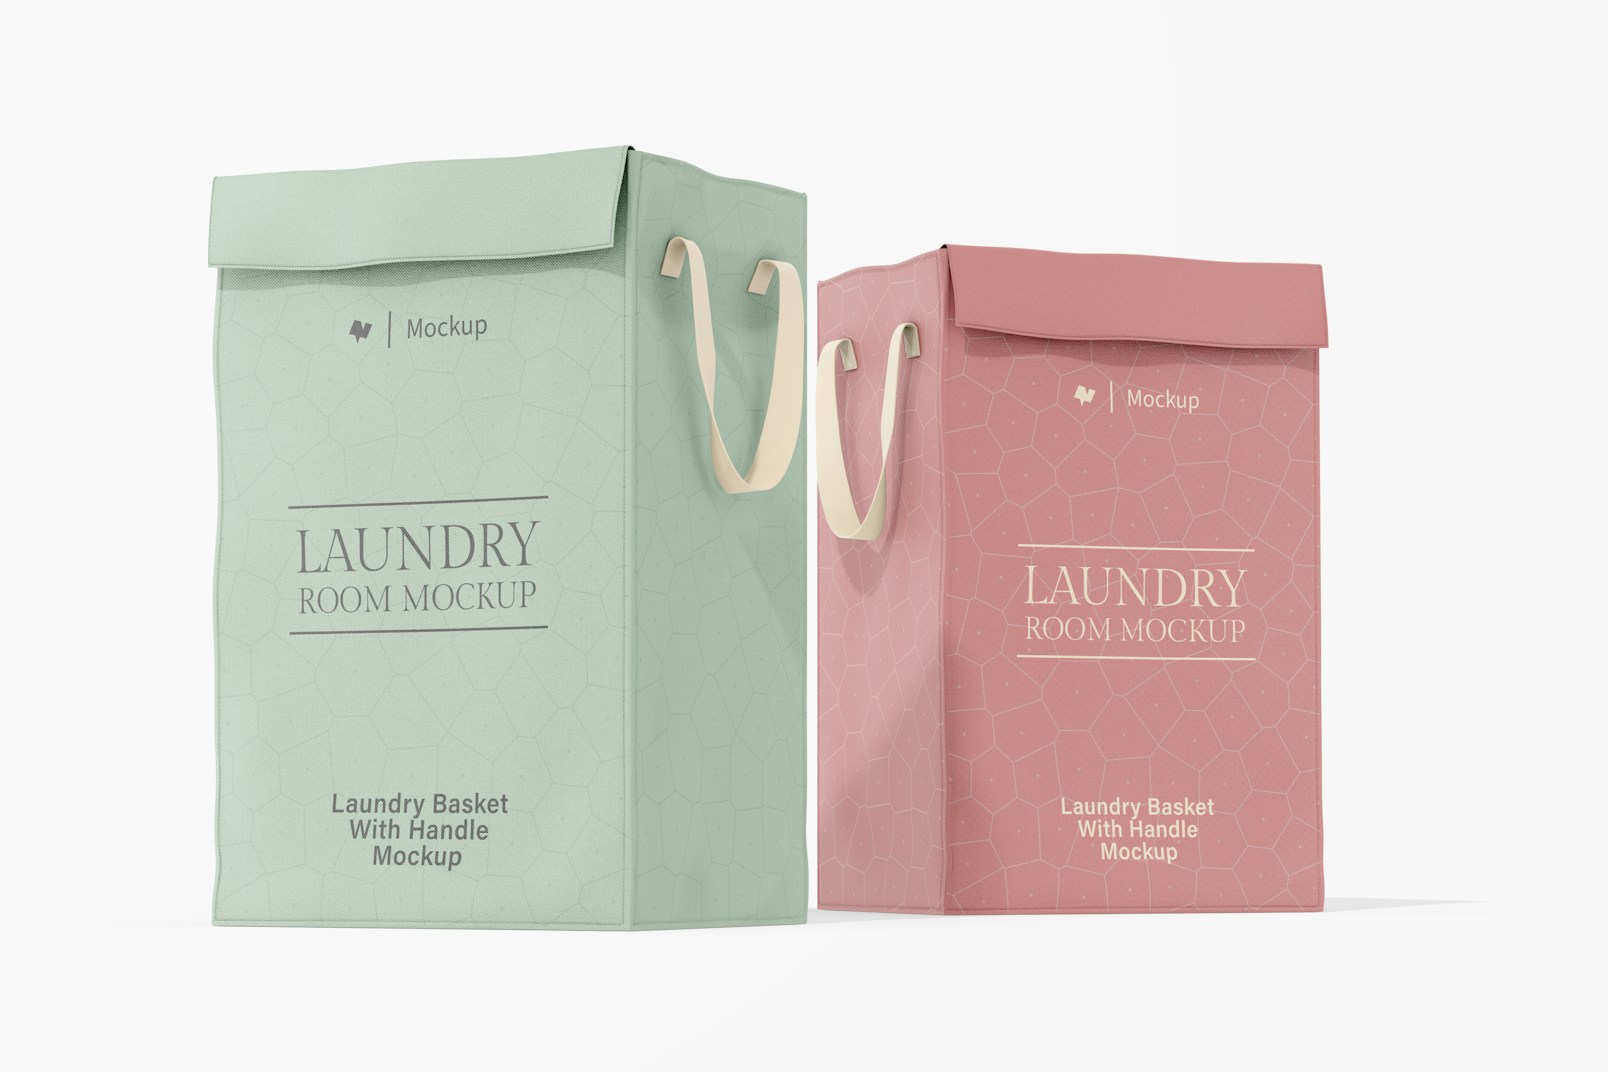 Laundry Baskets with Handle Mockup